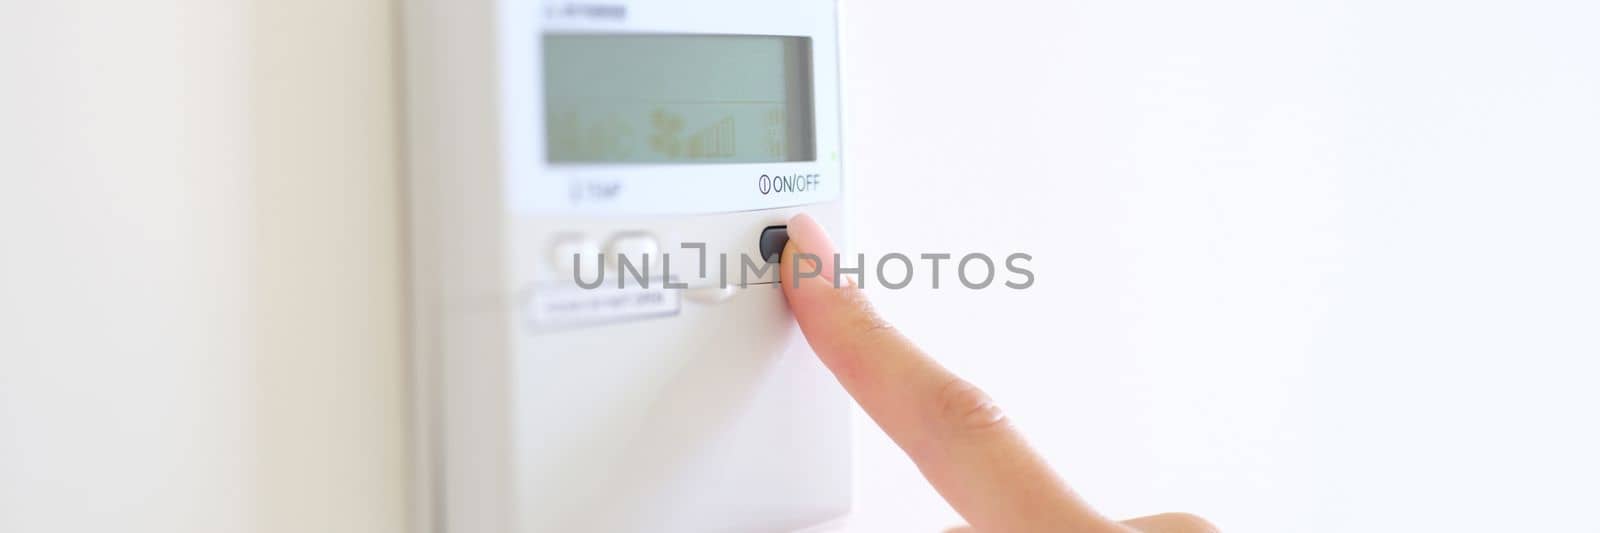 Wall mounted digital climate control and home thermostat by kuprevich